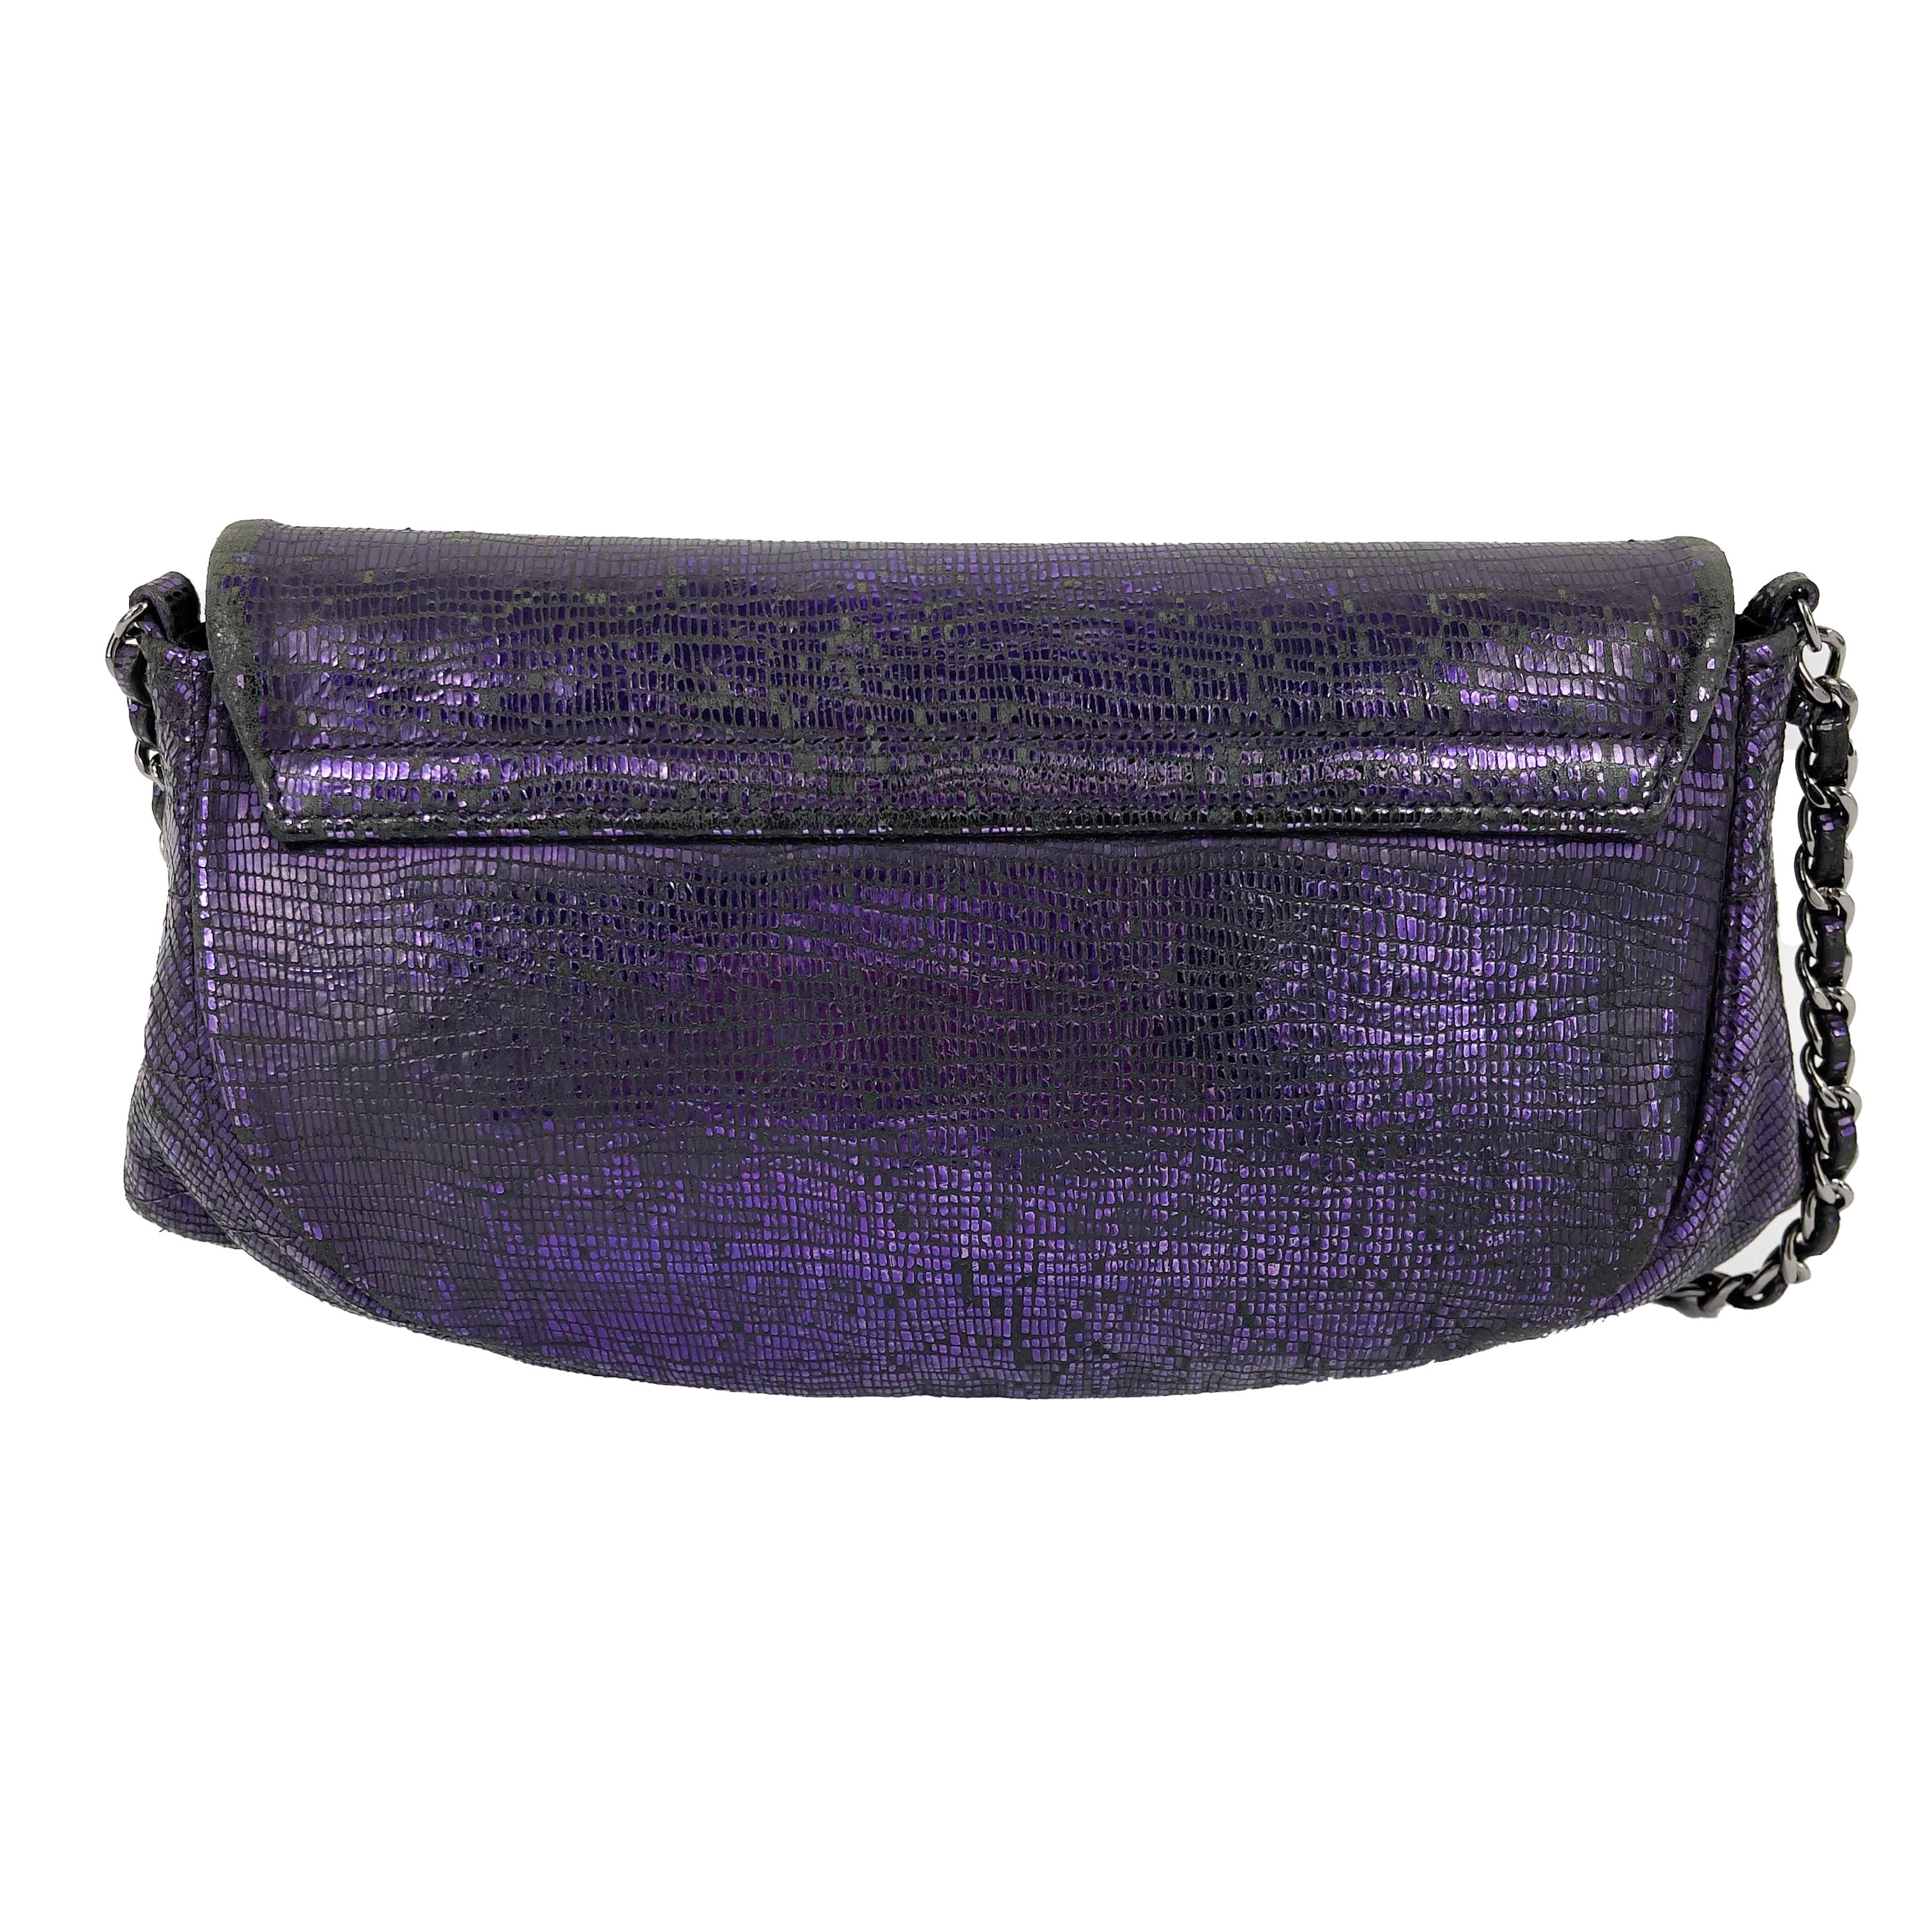 CHANEL- Half Moon Wallet on Chain Irridescent Purple Leather / Silver Crossbody

Description

This is a stunning Chanel Half Moon Wallet on Chain in a fabulous metallic purple lambskin leather with shiny silver tone hardware. A timeless Chanel